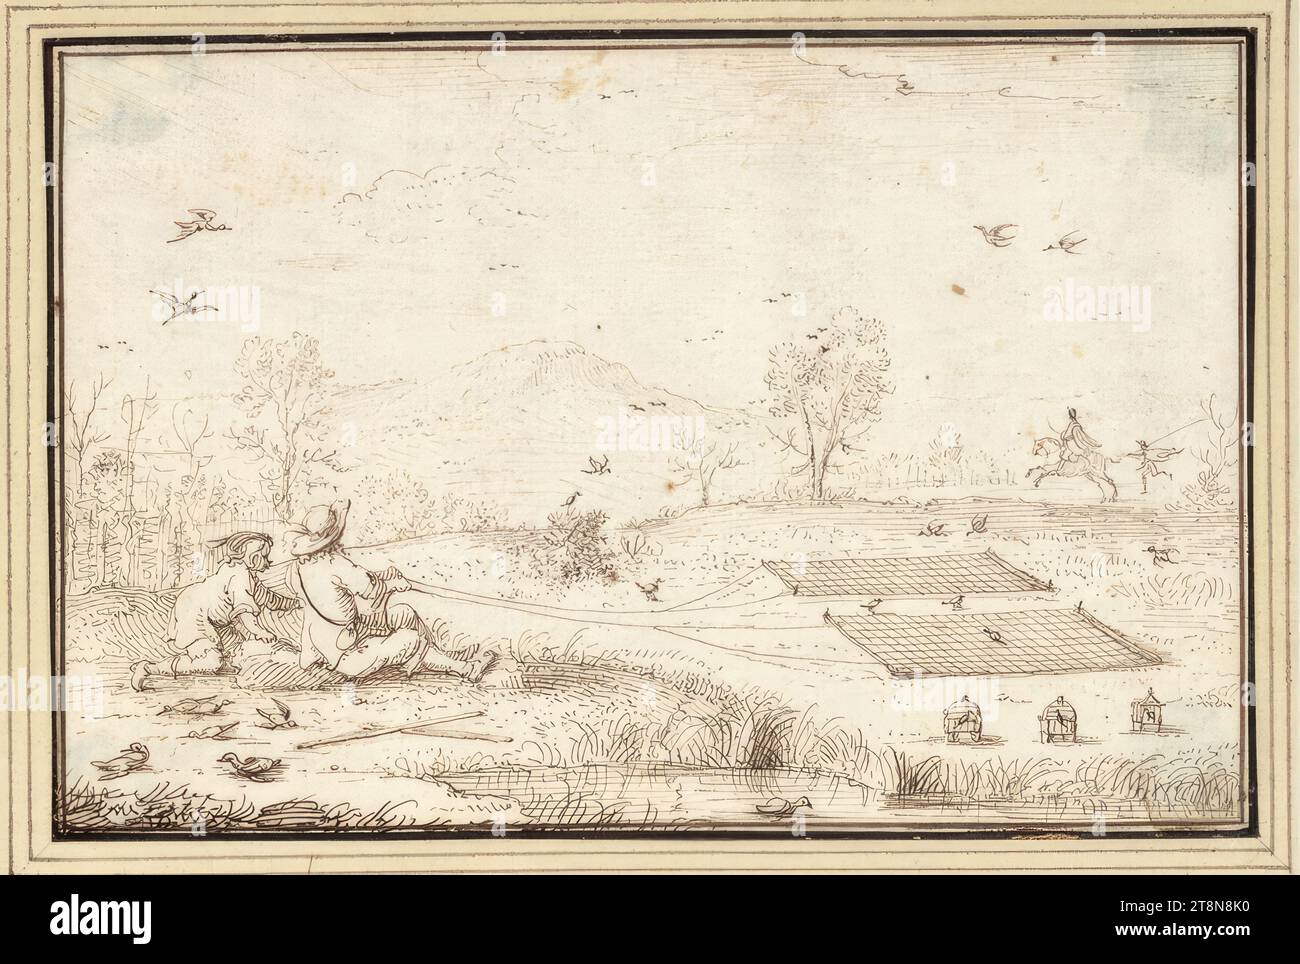 Two Fowlers at Work (I-14e), '1er Livre de Dessin' with 20 sheets, Albert Flamen (Bruges c. 1620 - after 1693 Paris), drawing, pen and ink in brown, 10.9 x 16.3 cm, r. and Duke Albert of Saxe-Teschen Stock Photo